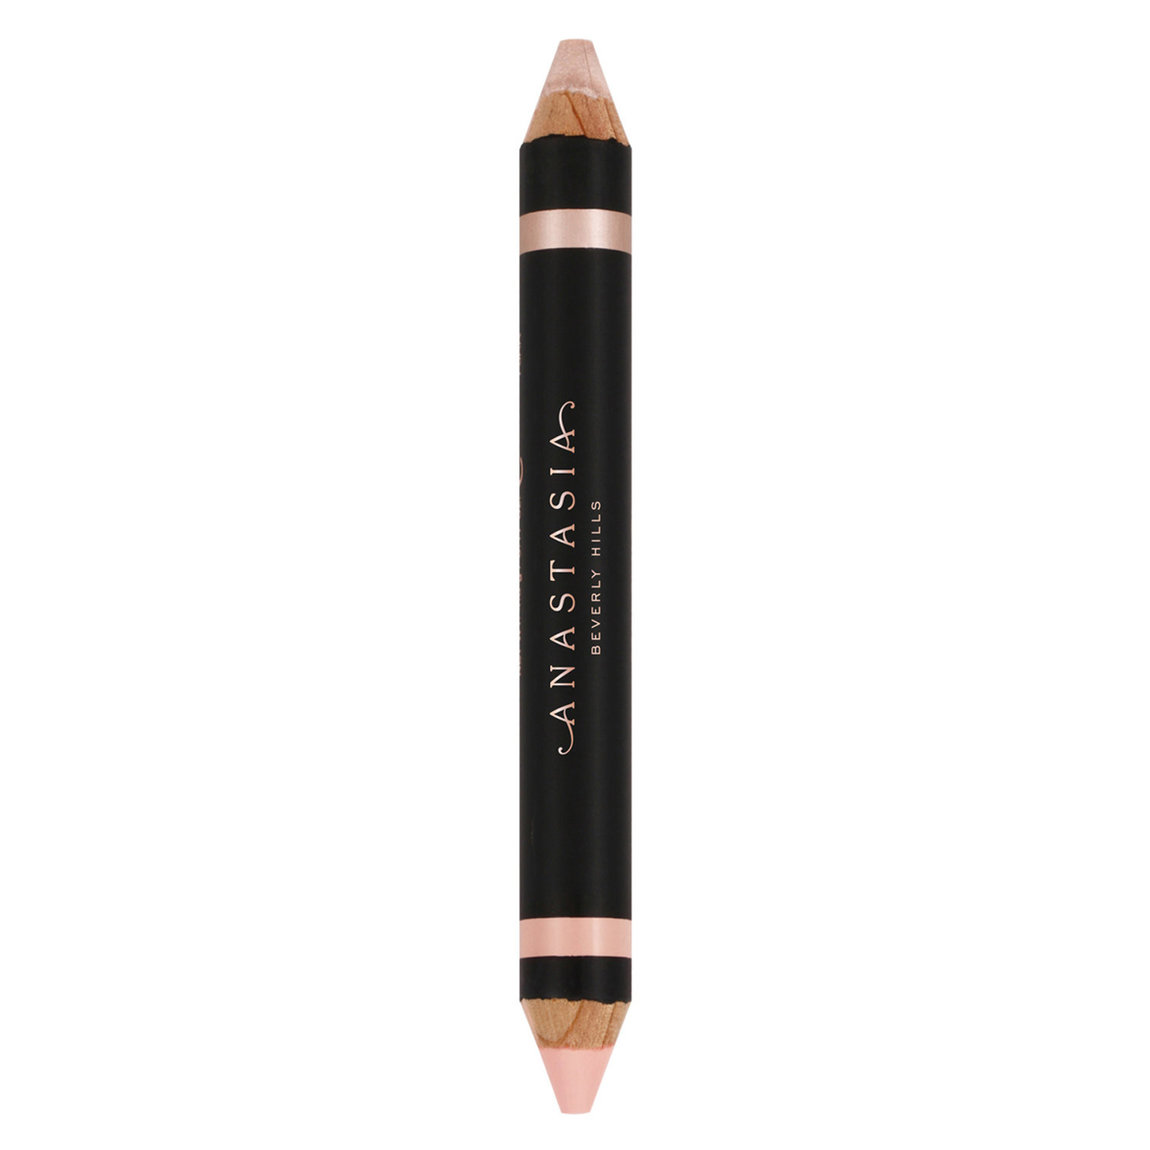 Anastasia Beverly Hills Highlighting Duo Pencil Matte Camille / Sand Shimmer alternative view 1.